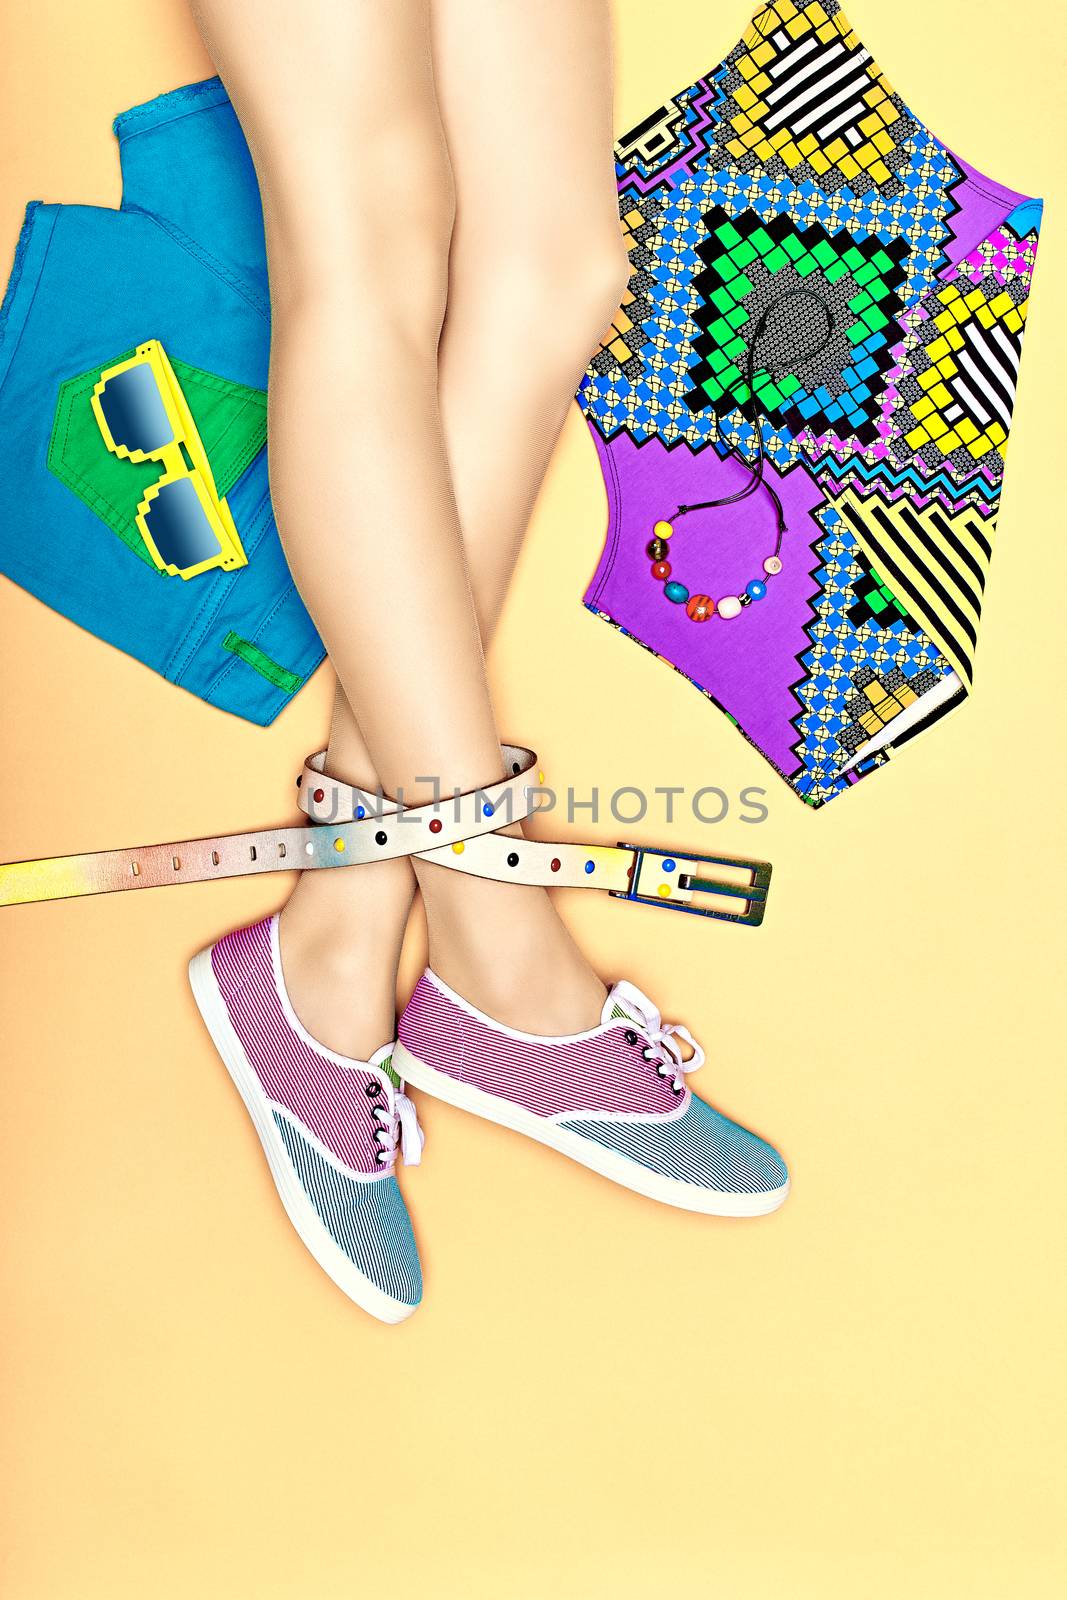 Fashion clothes stylish set, accessories, womans sexy legs, people. Hipster girl creative look in trendy gumshoes, top, shorts, sunglasses, belt. Unusual vivid youth style on yellow, copyspace